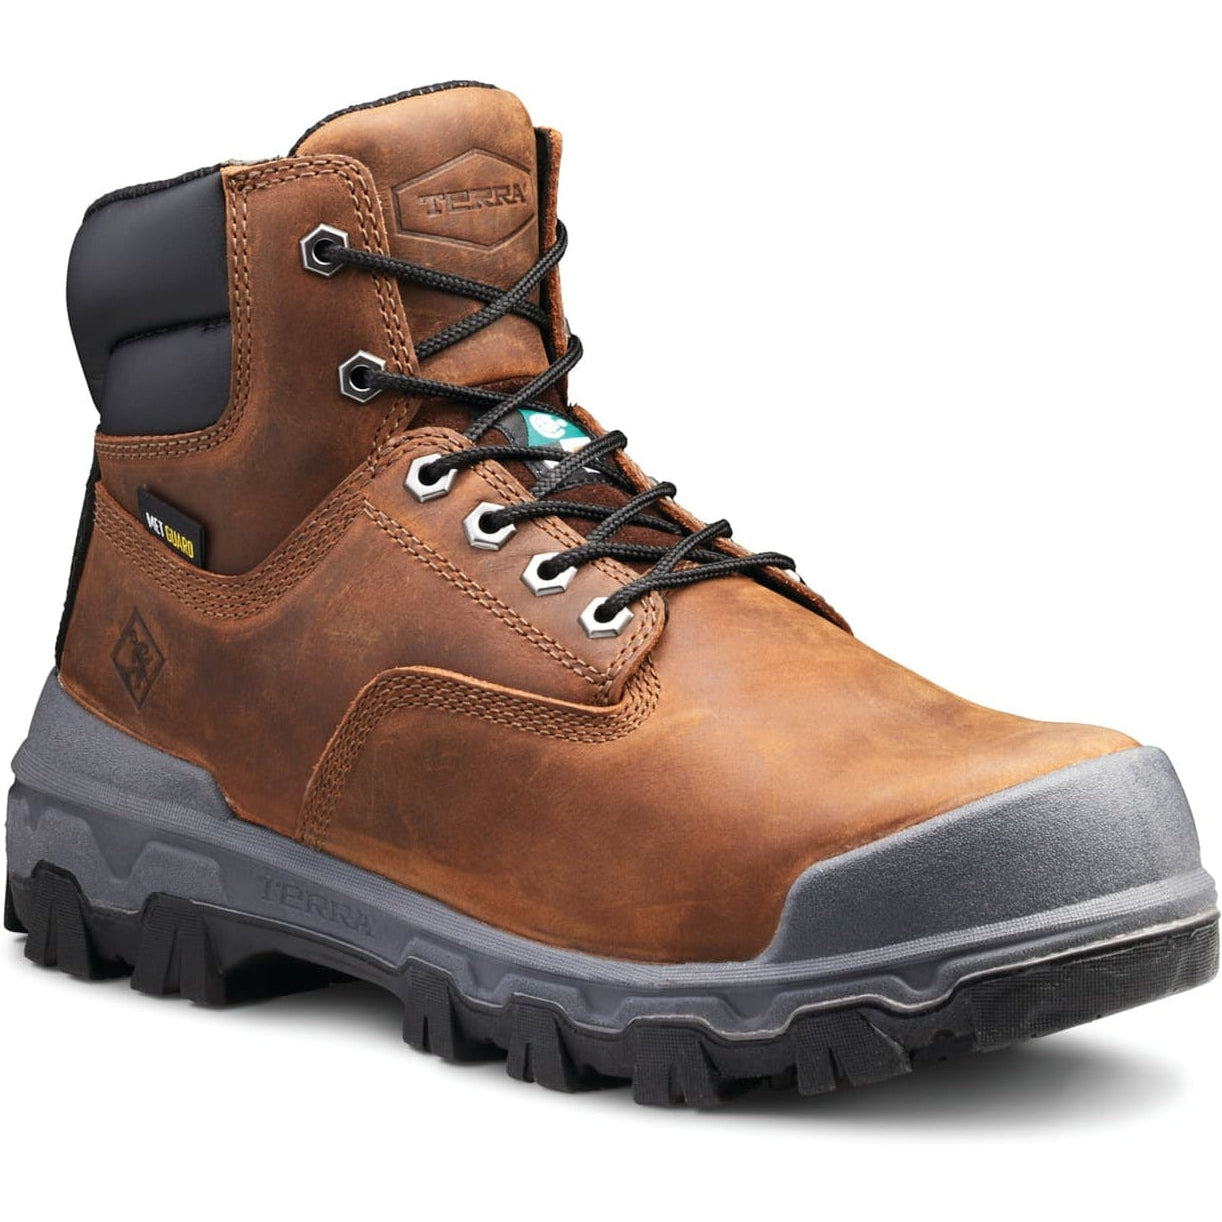 Terra Men's Sentry 2020 6" Comp Toe WP Safety Work Boot -Brown- R4NWBN 7 / Wide / Brown - Overlook Boots